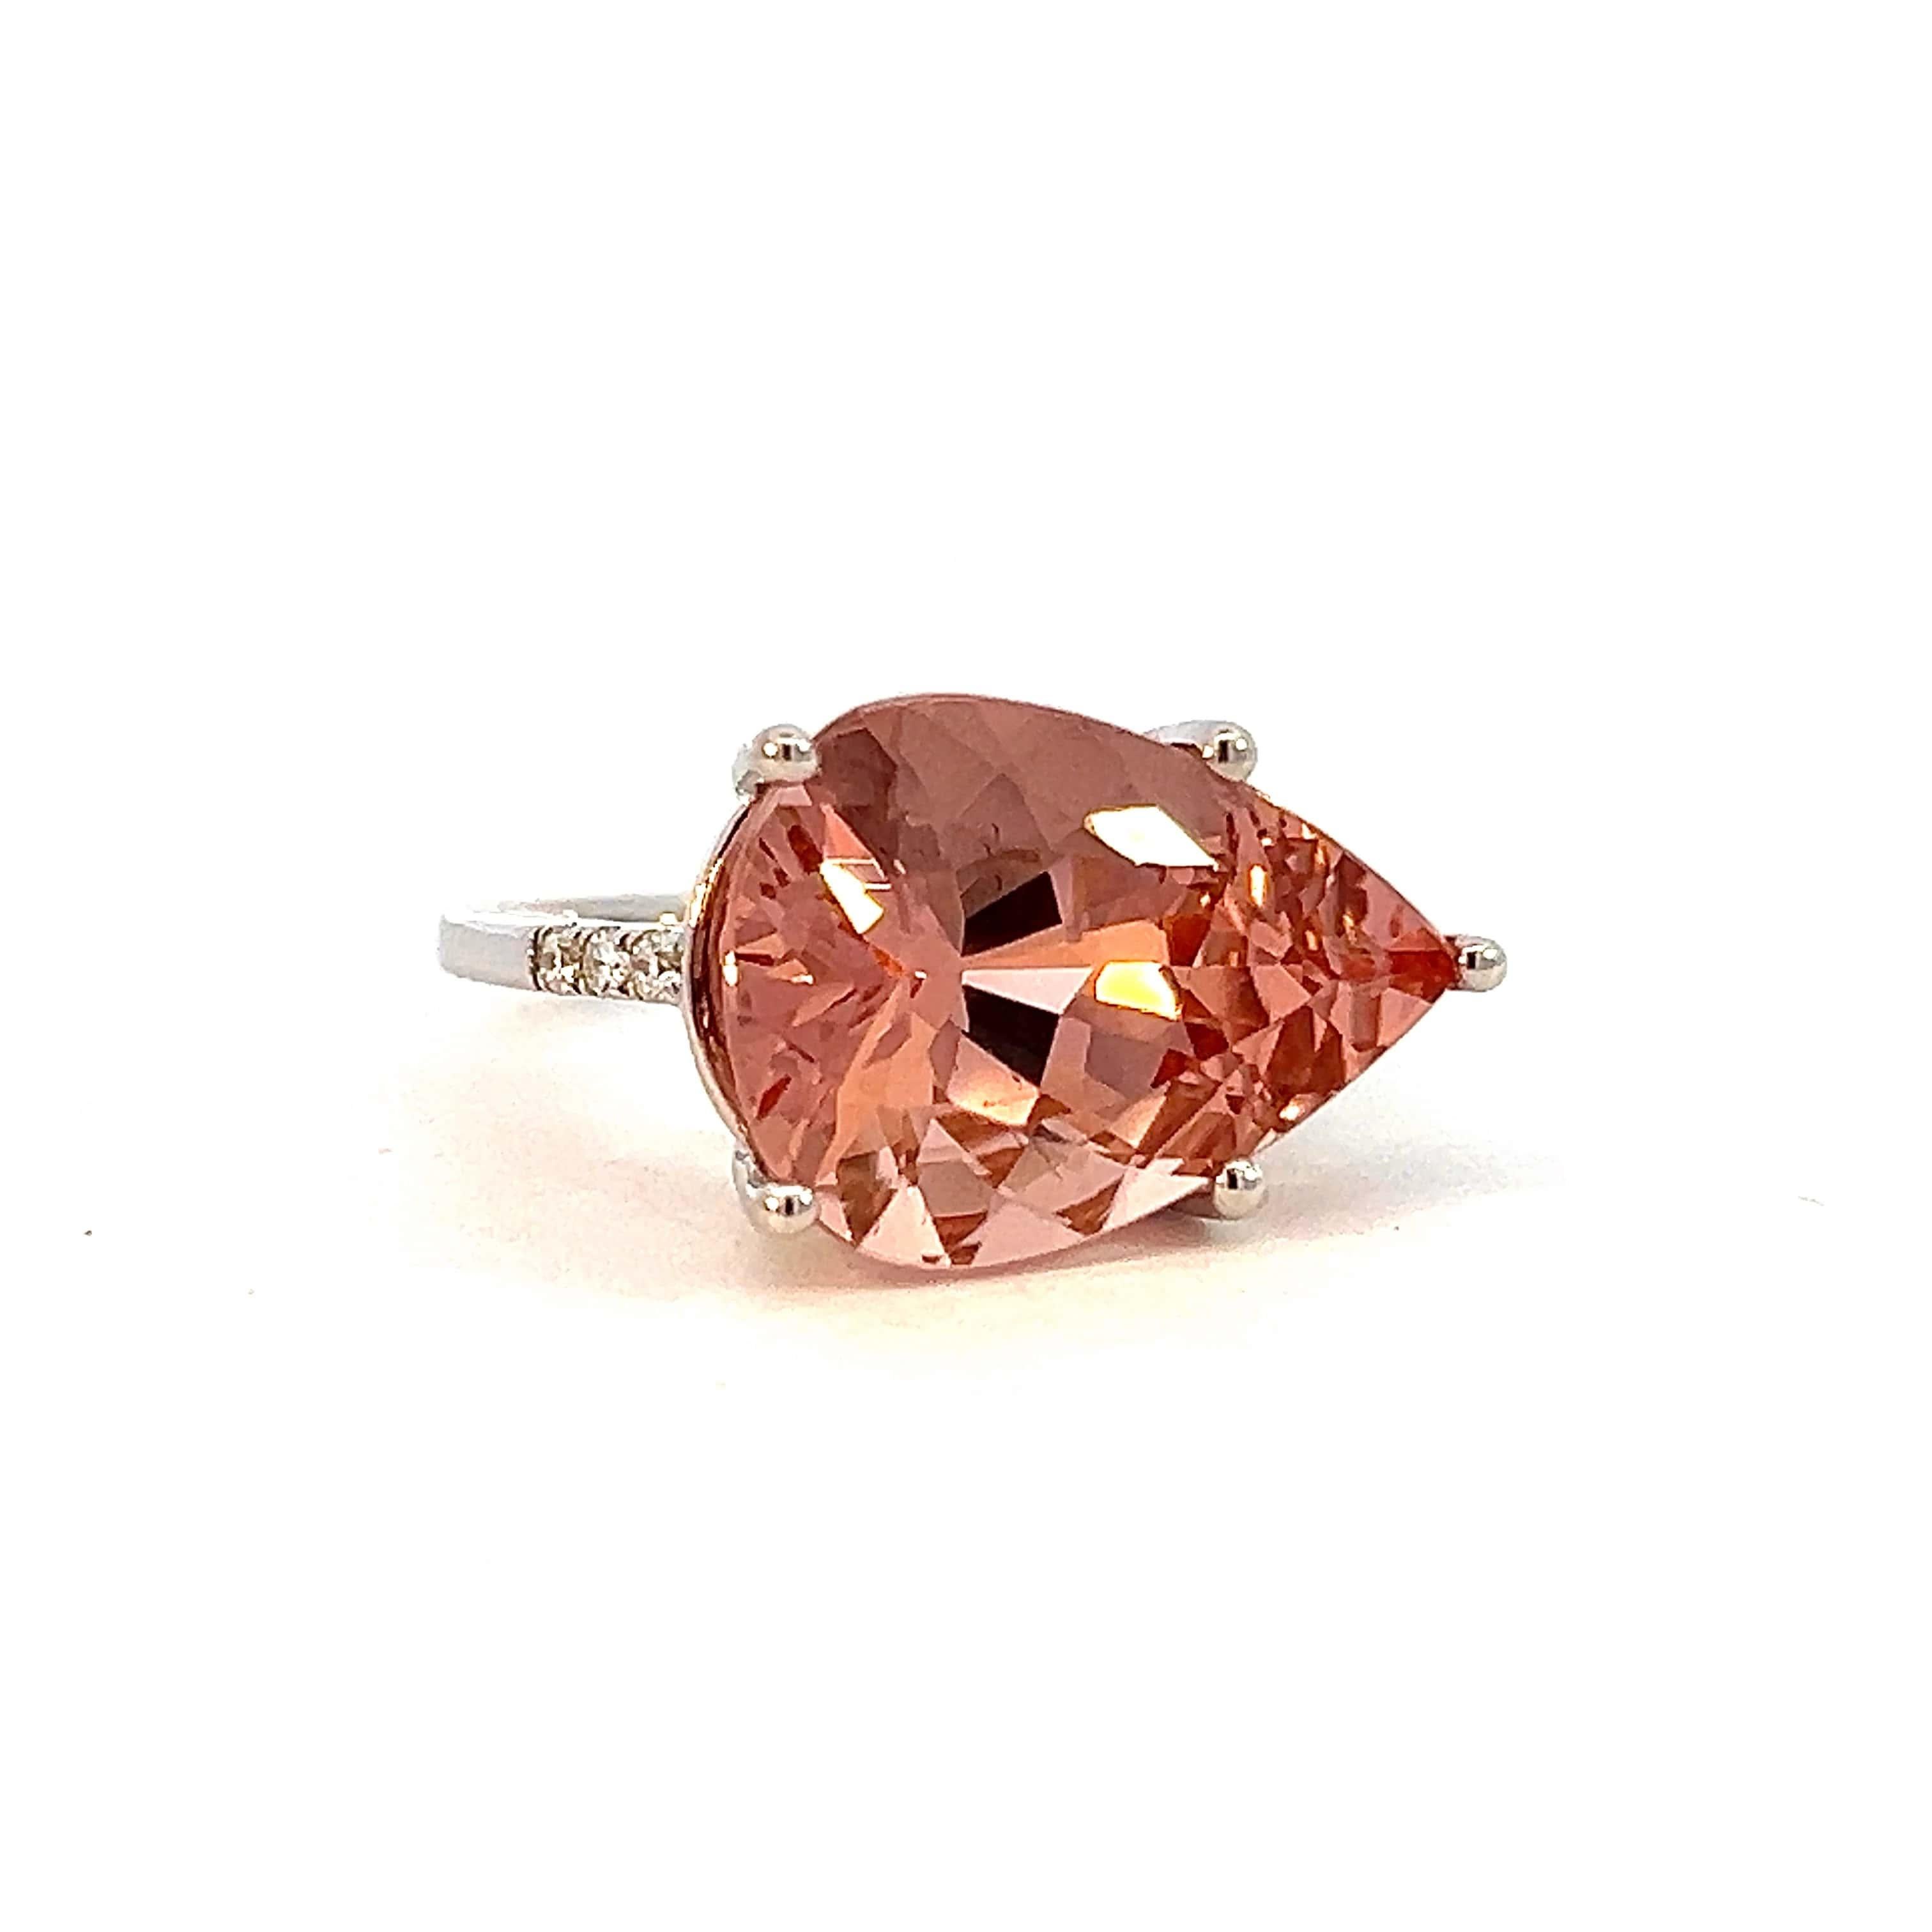 Natural Morganite Diamond Ring 6.5 14k White Gold 8.99 TCW Certified  For Sale 6